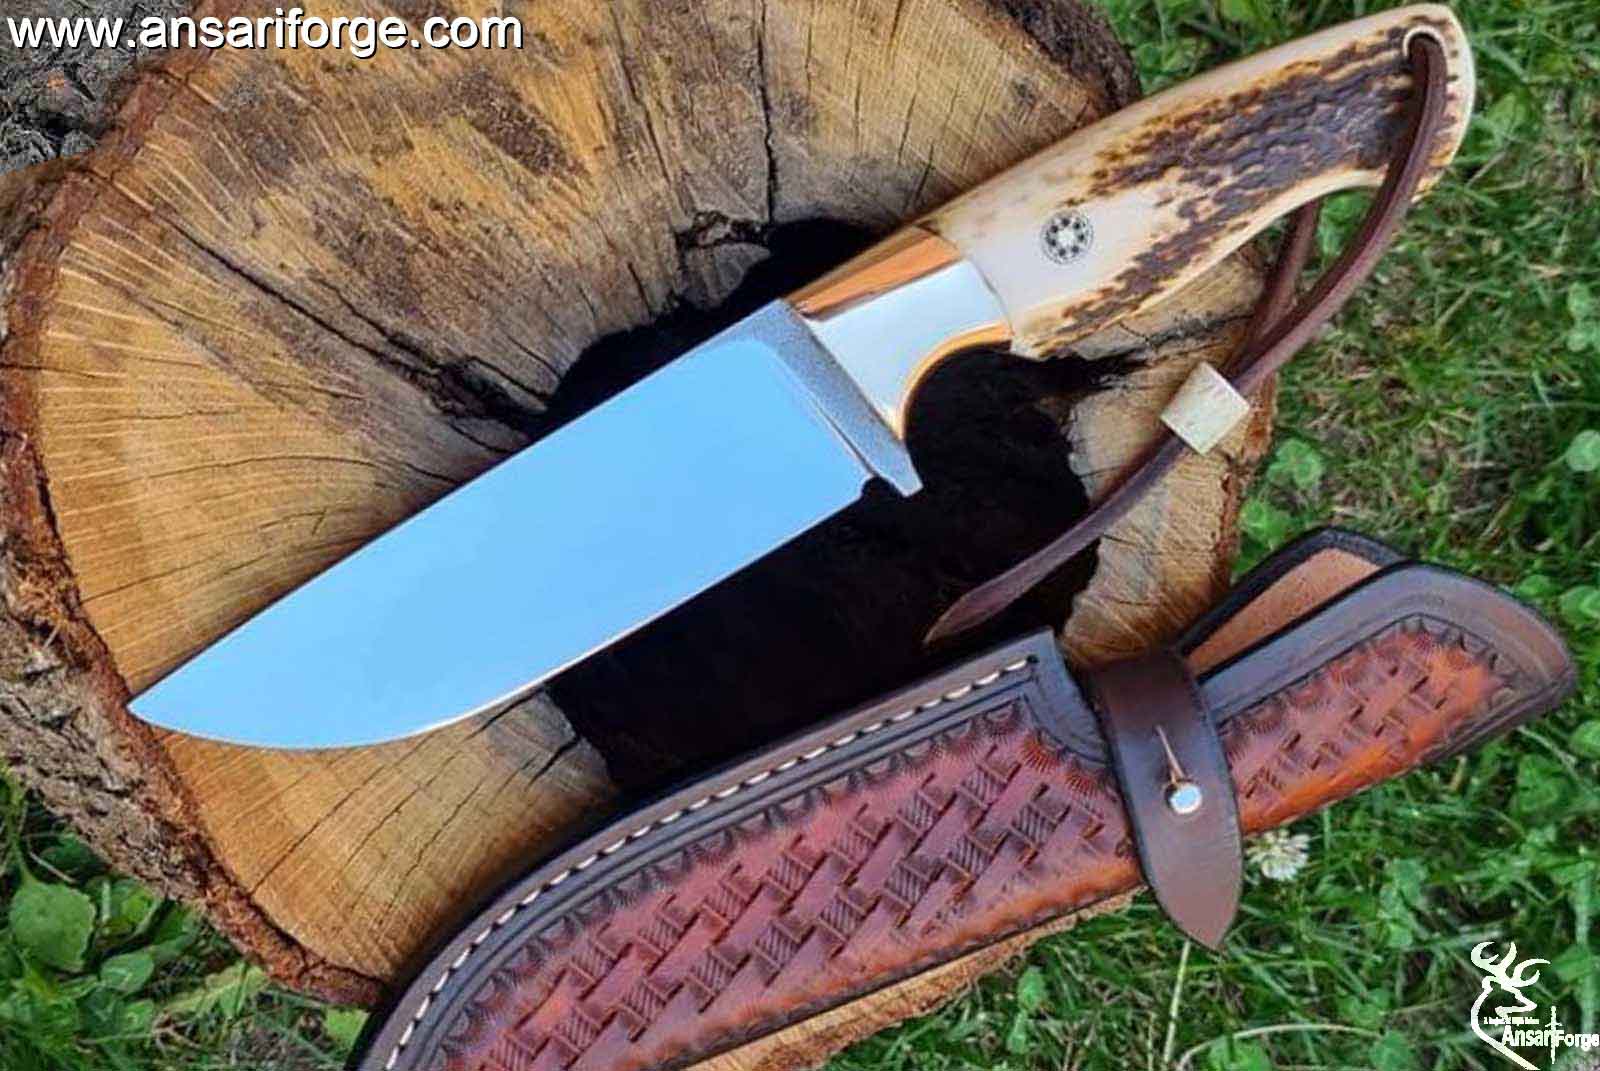 Custom Handmade Fixed Blade Knife D2 Steel Blade Stag Antler Handle 10 inches  Knife, Hunting Camping Survival Outdoor Tools With Leather Sheath